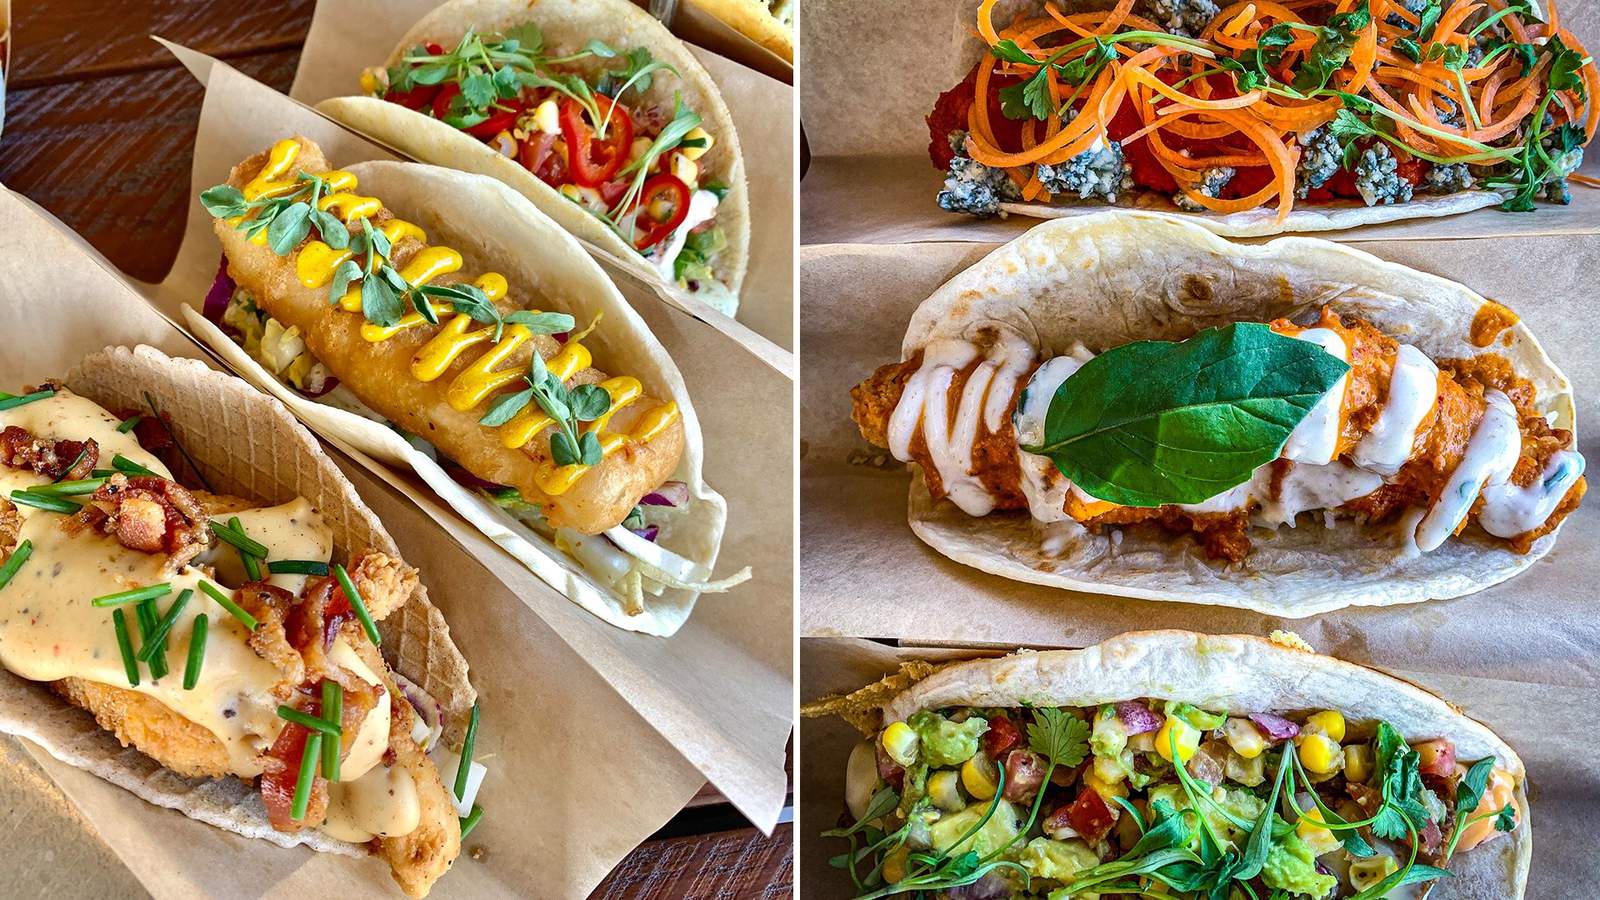 Calling all adventurous foodies: This globally inspired gourmet taco shop aims to please